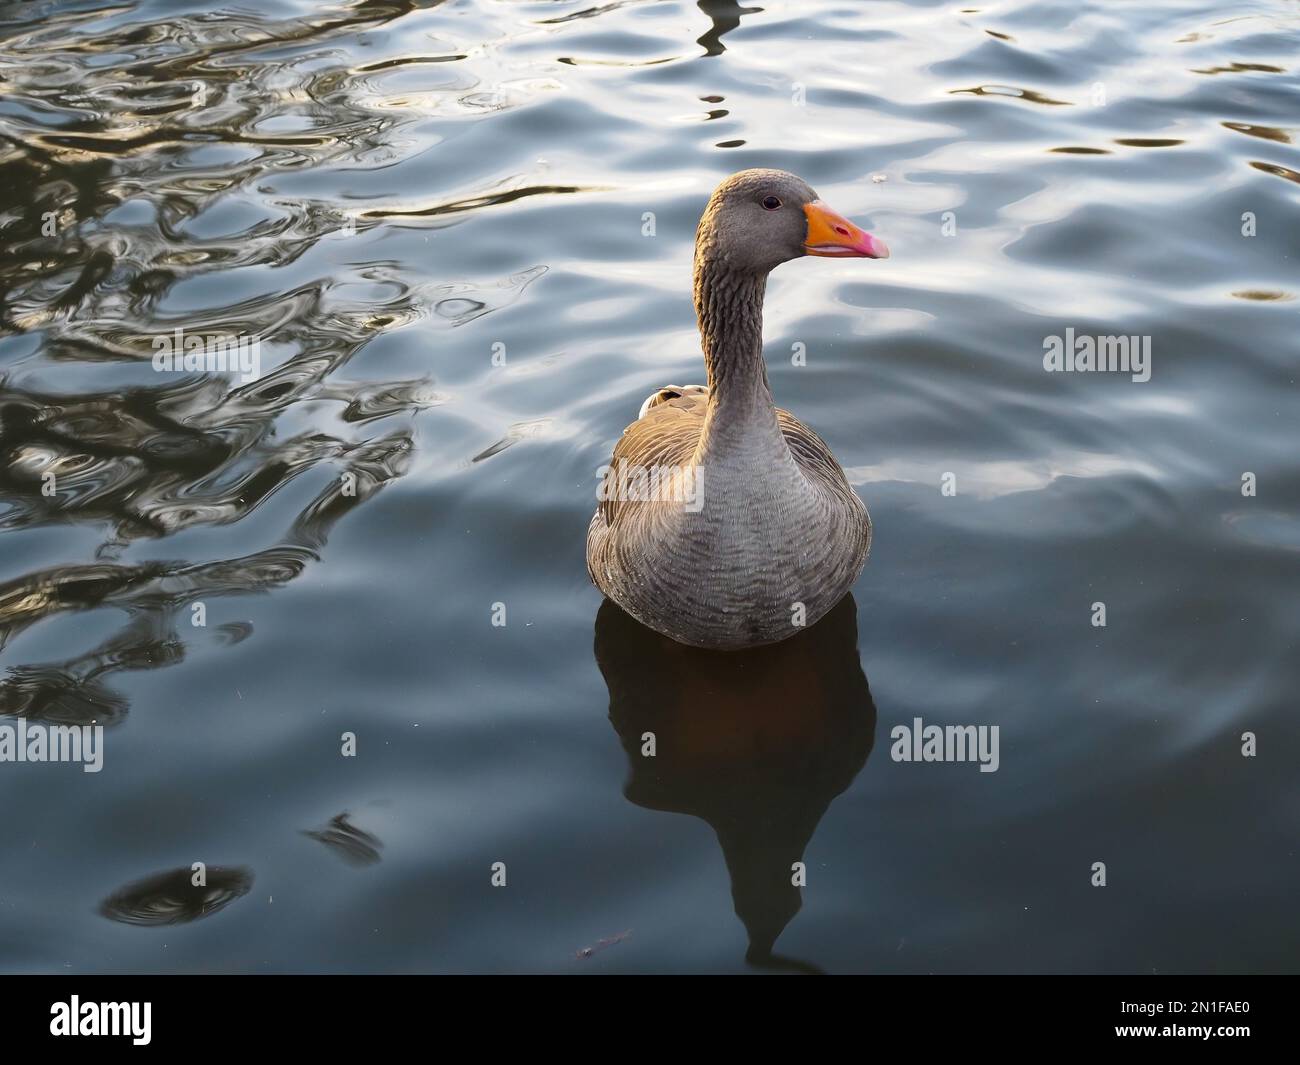 Single Greylag goose (Anser anser) on water looking to the side and showing its orange bill, in winter in Britain (includes copy space) Stock Photo